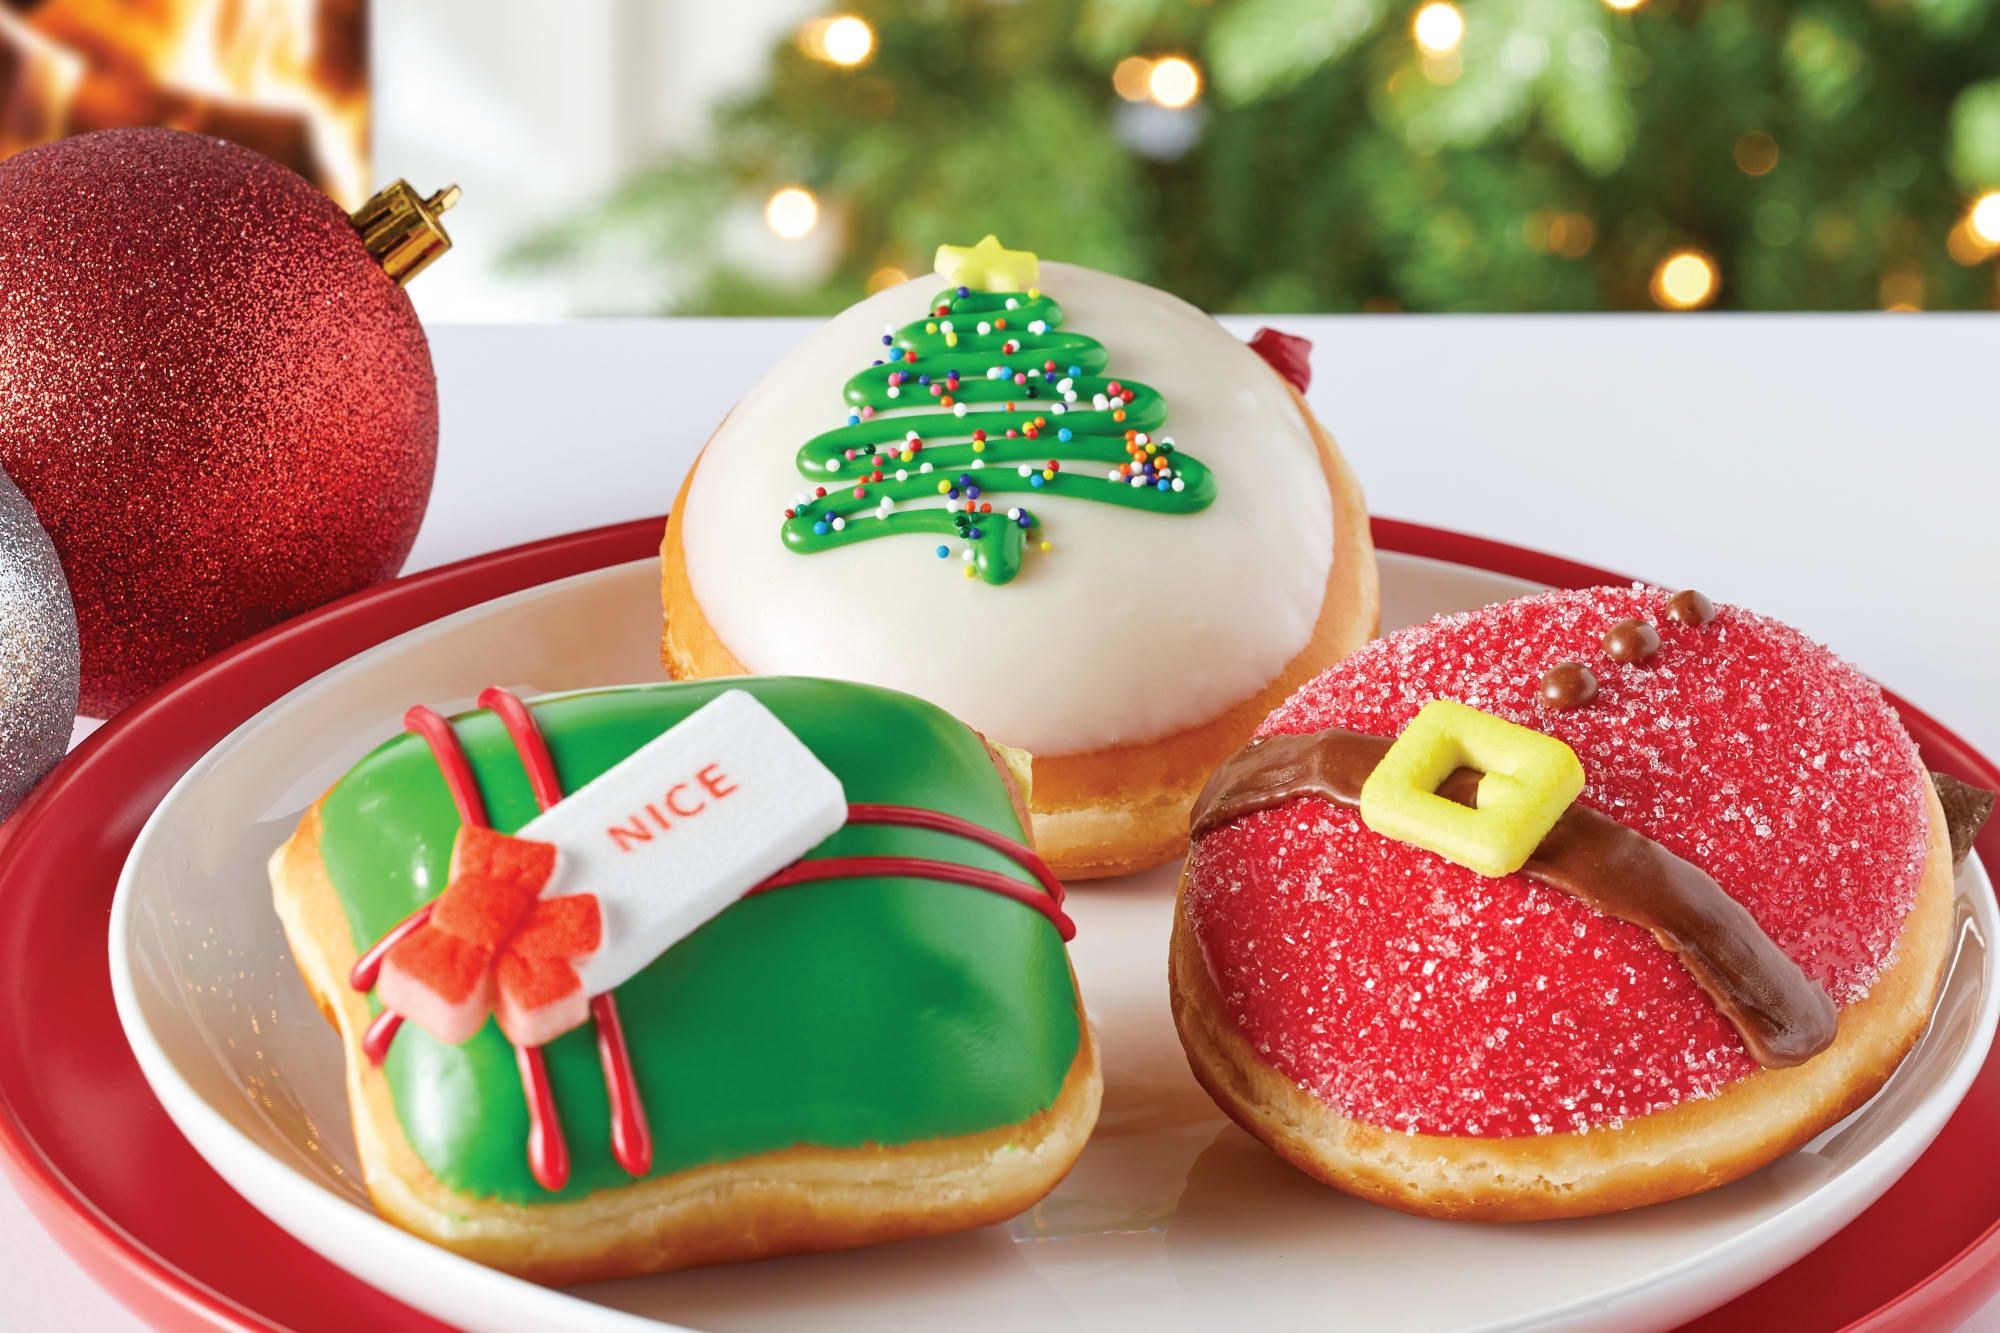 the nicest holiday collection of donuts from krispy kreme